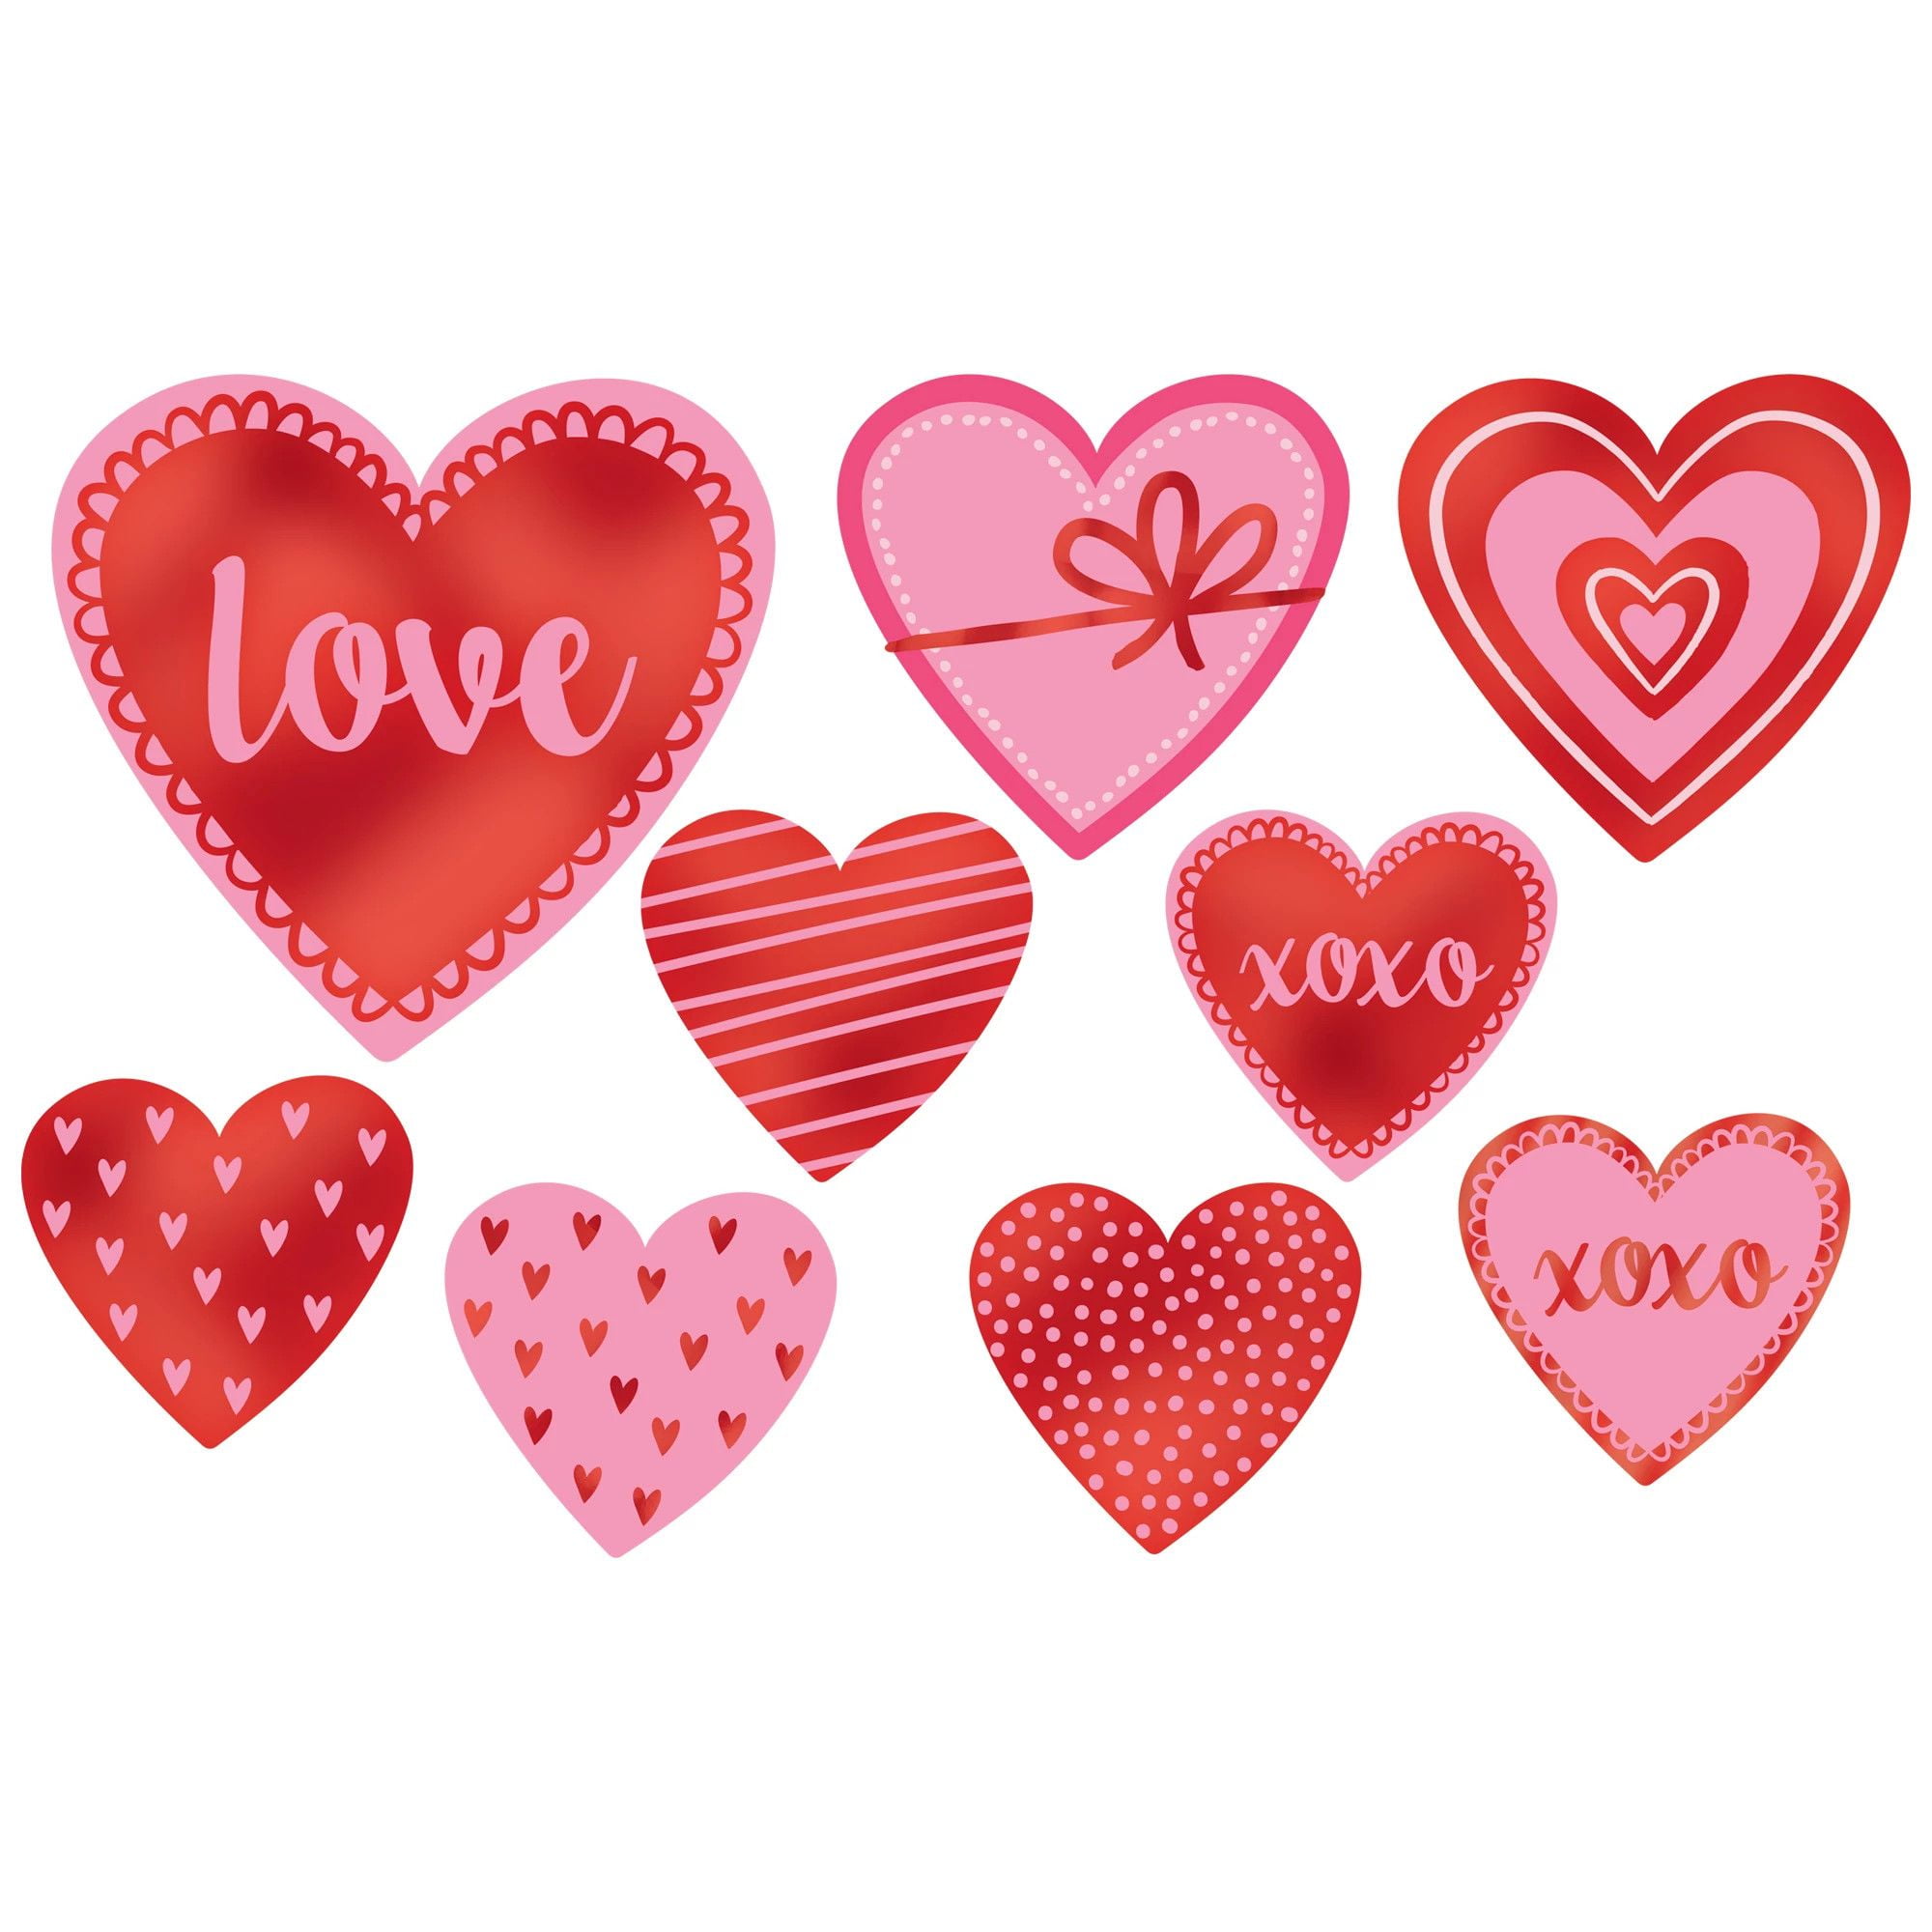 Premium Photo  Red white and pink paper hearts cut out of paper for  decorating on valentines day